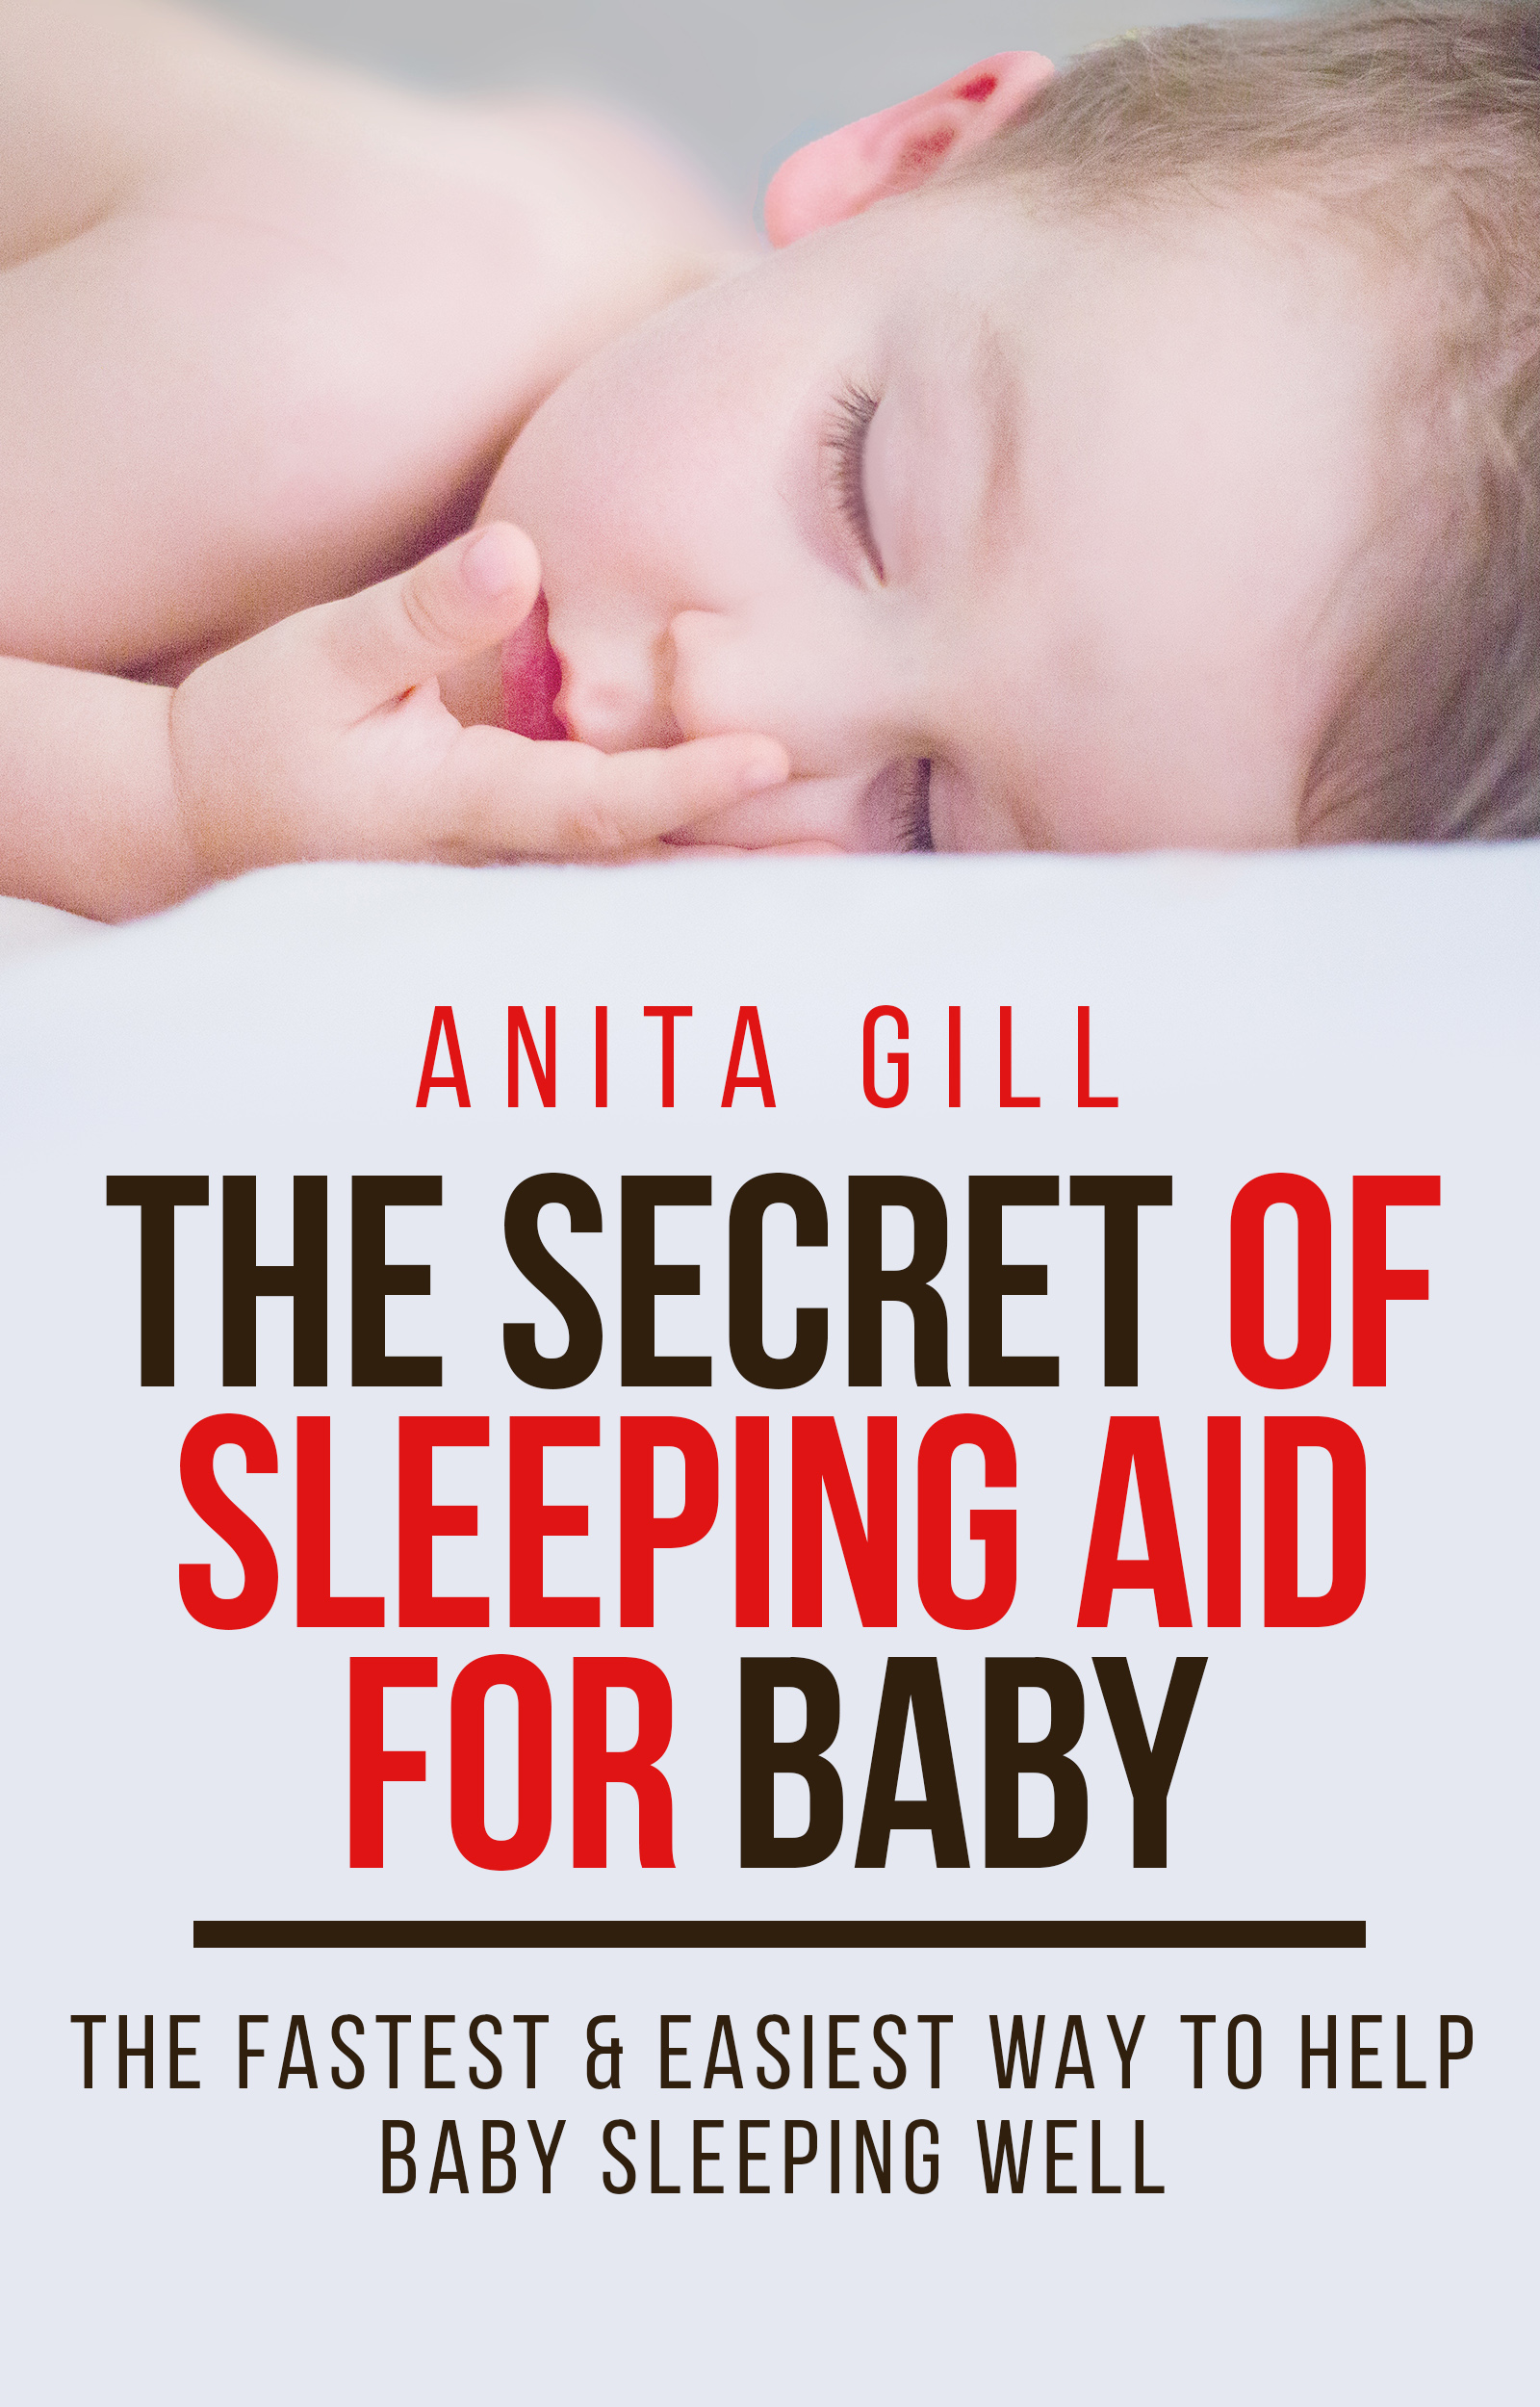 FREE: THE SECRET OF SLEEPING AID FOR BABY: THE FASTEST & EASIEST WAY TO HELP BABY SLEEPING WELL by Anita Gill